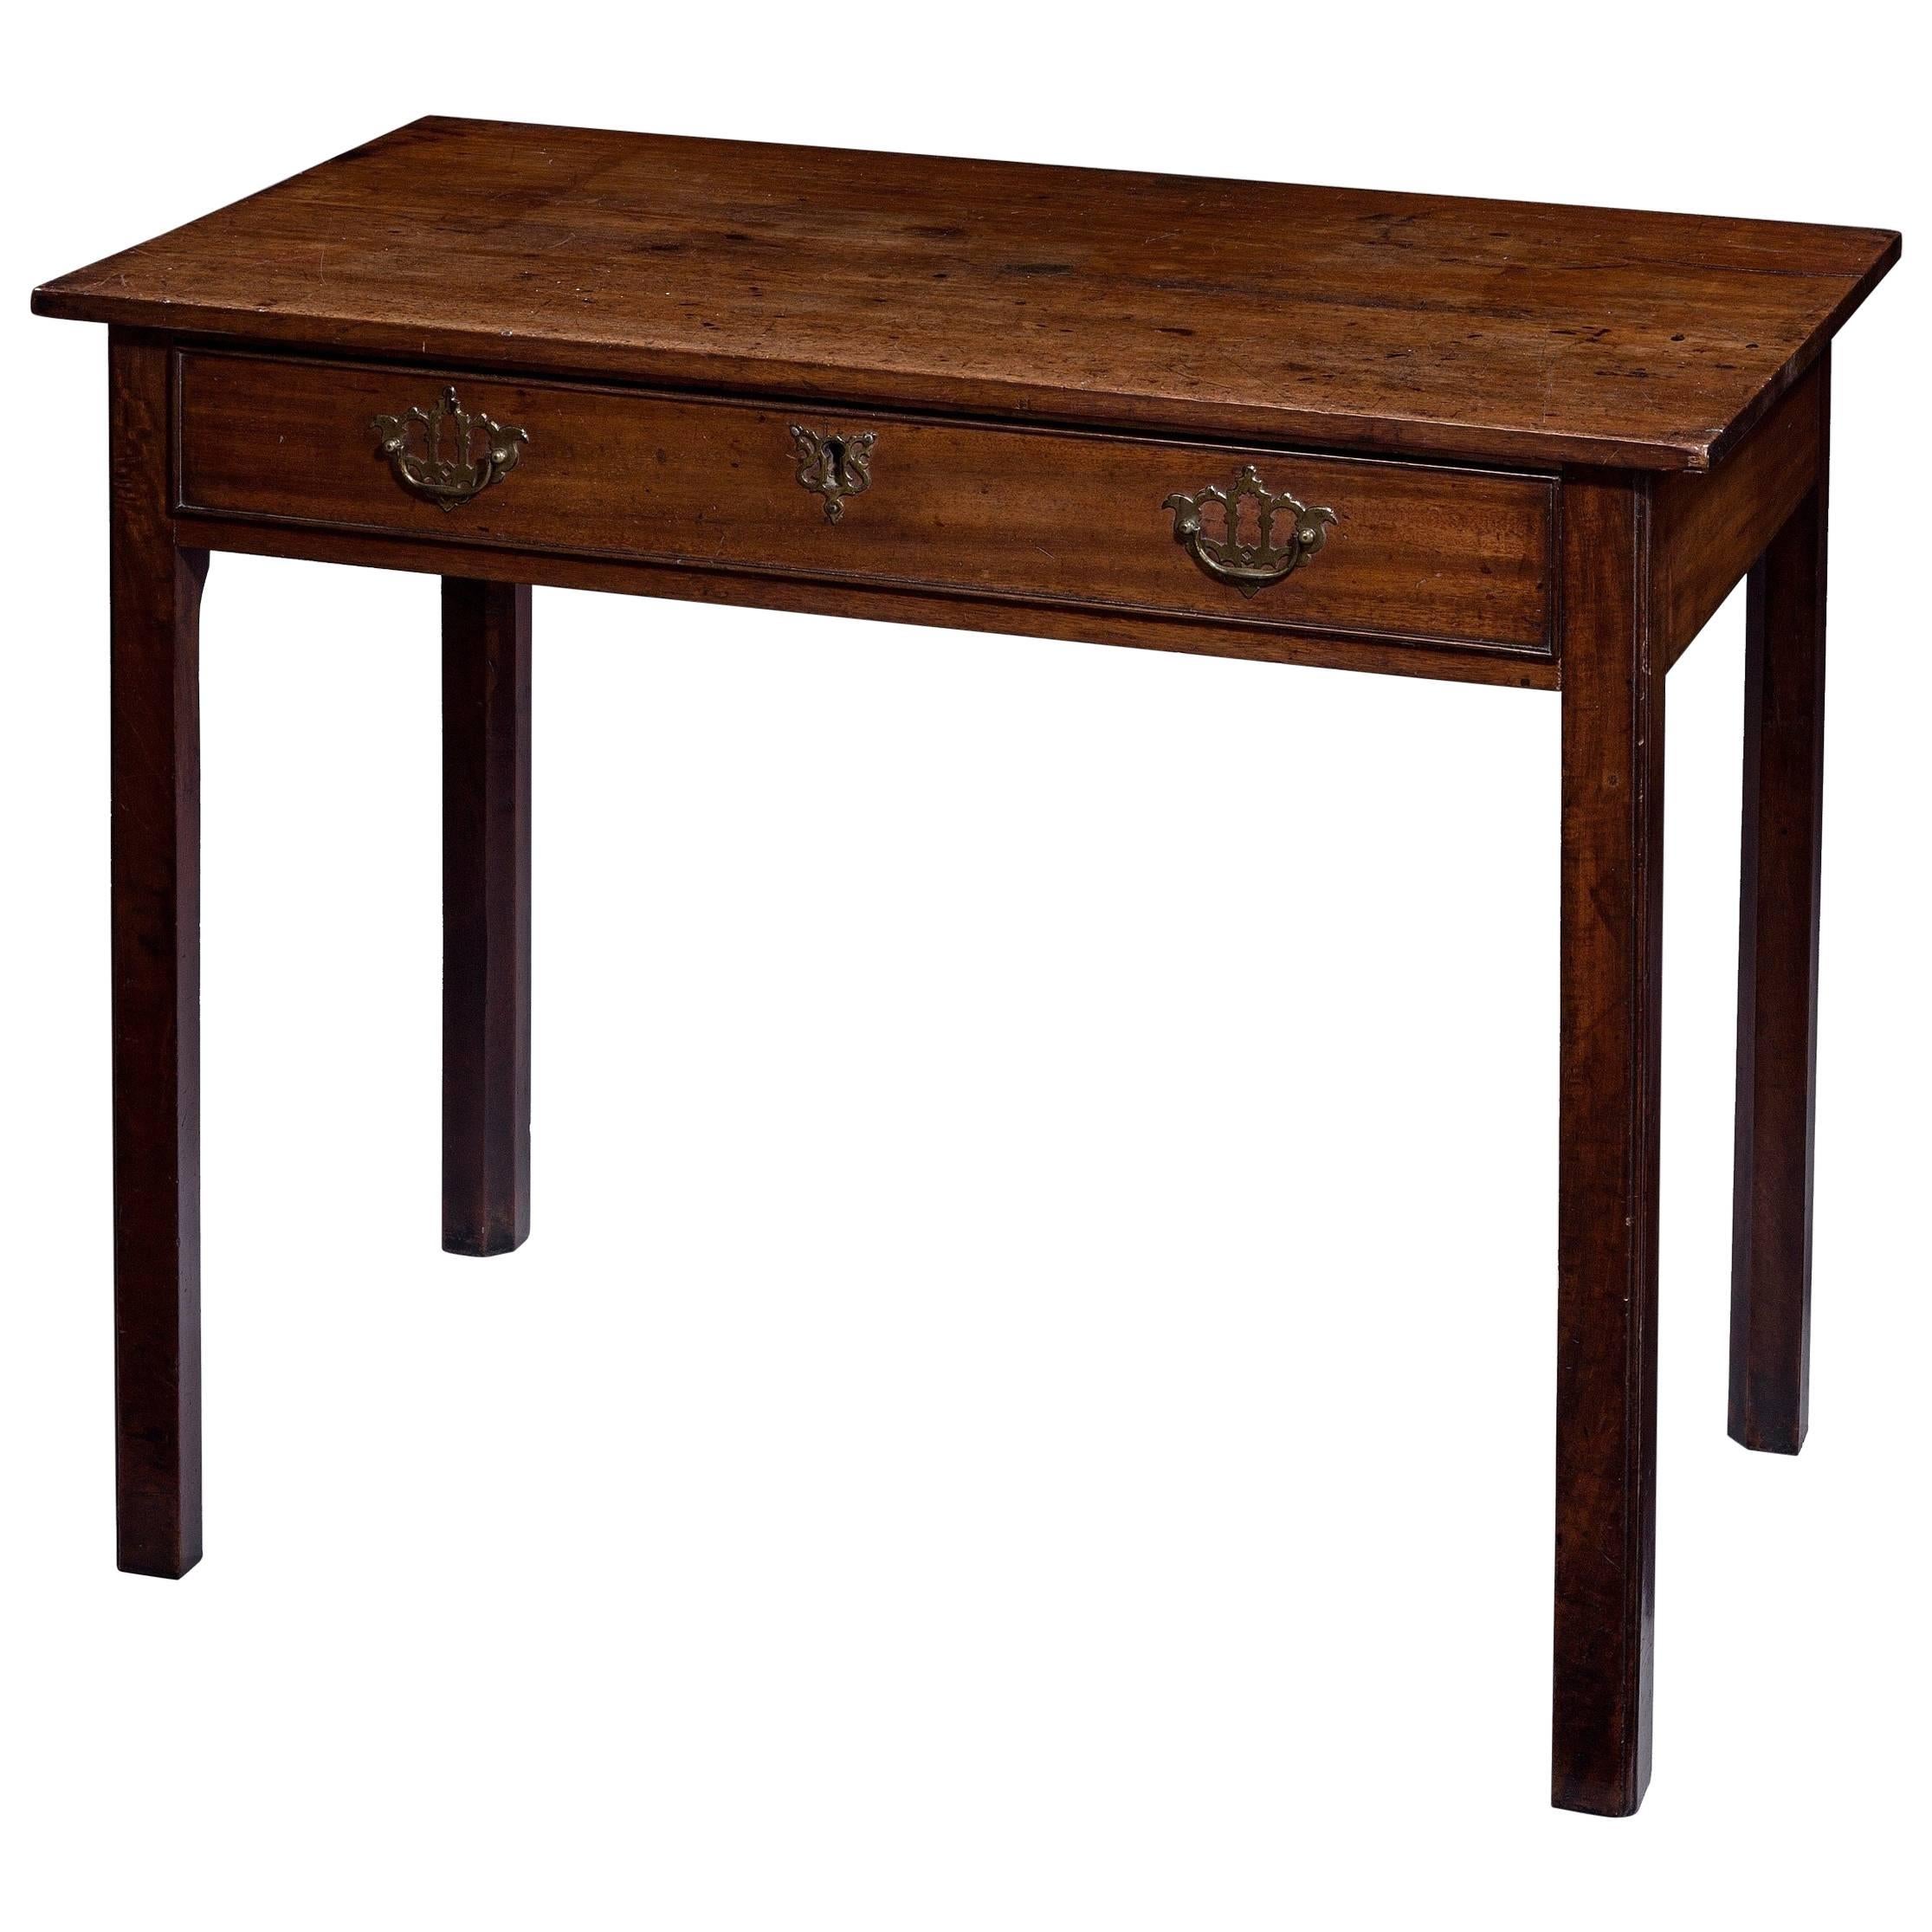 18th Century Chippendale Period Mahogany Side Table with Chinese Rococo Handles. For Sale